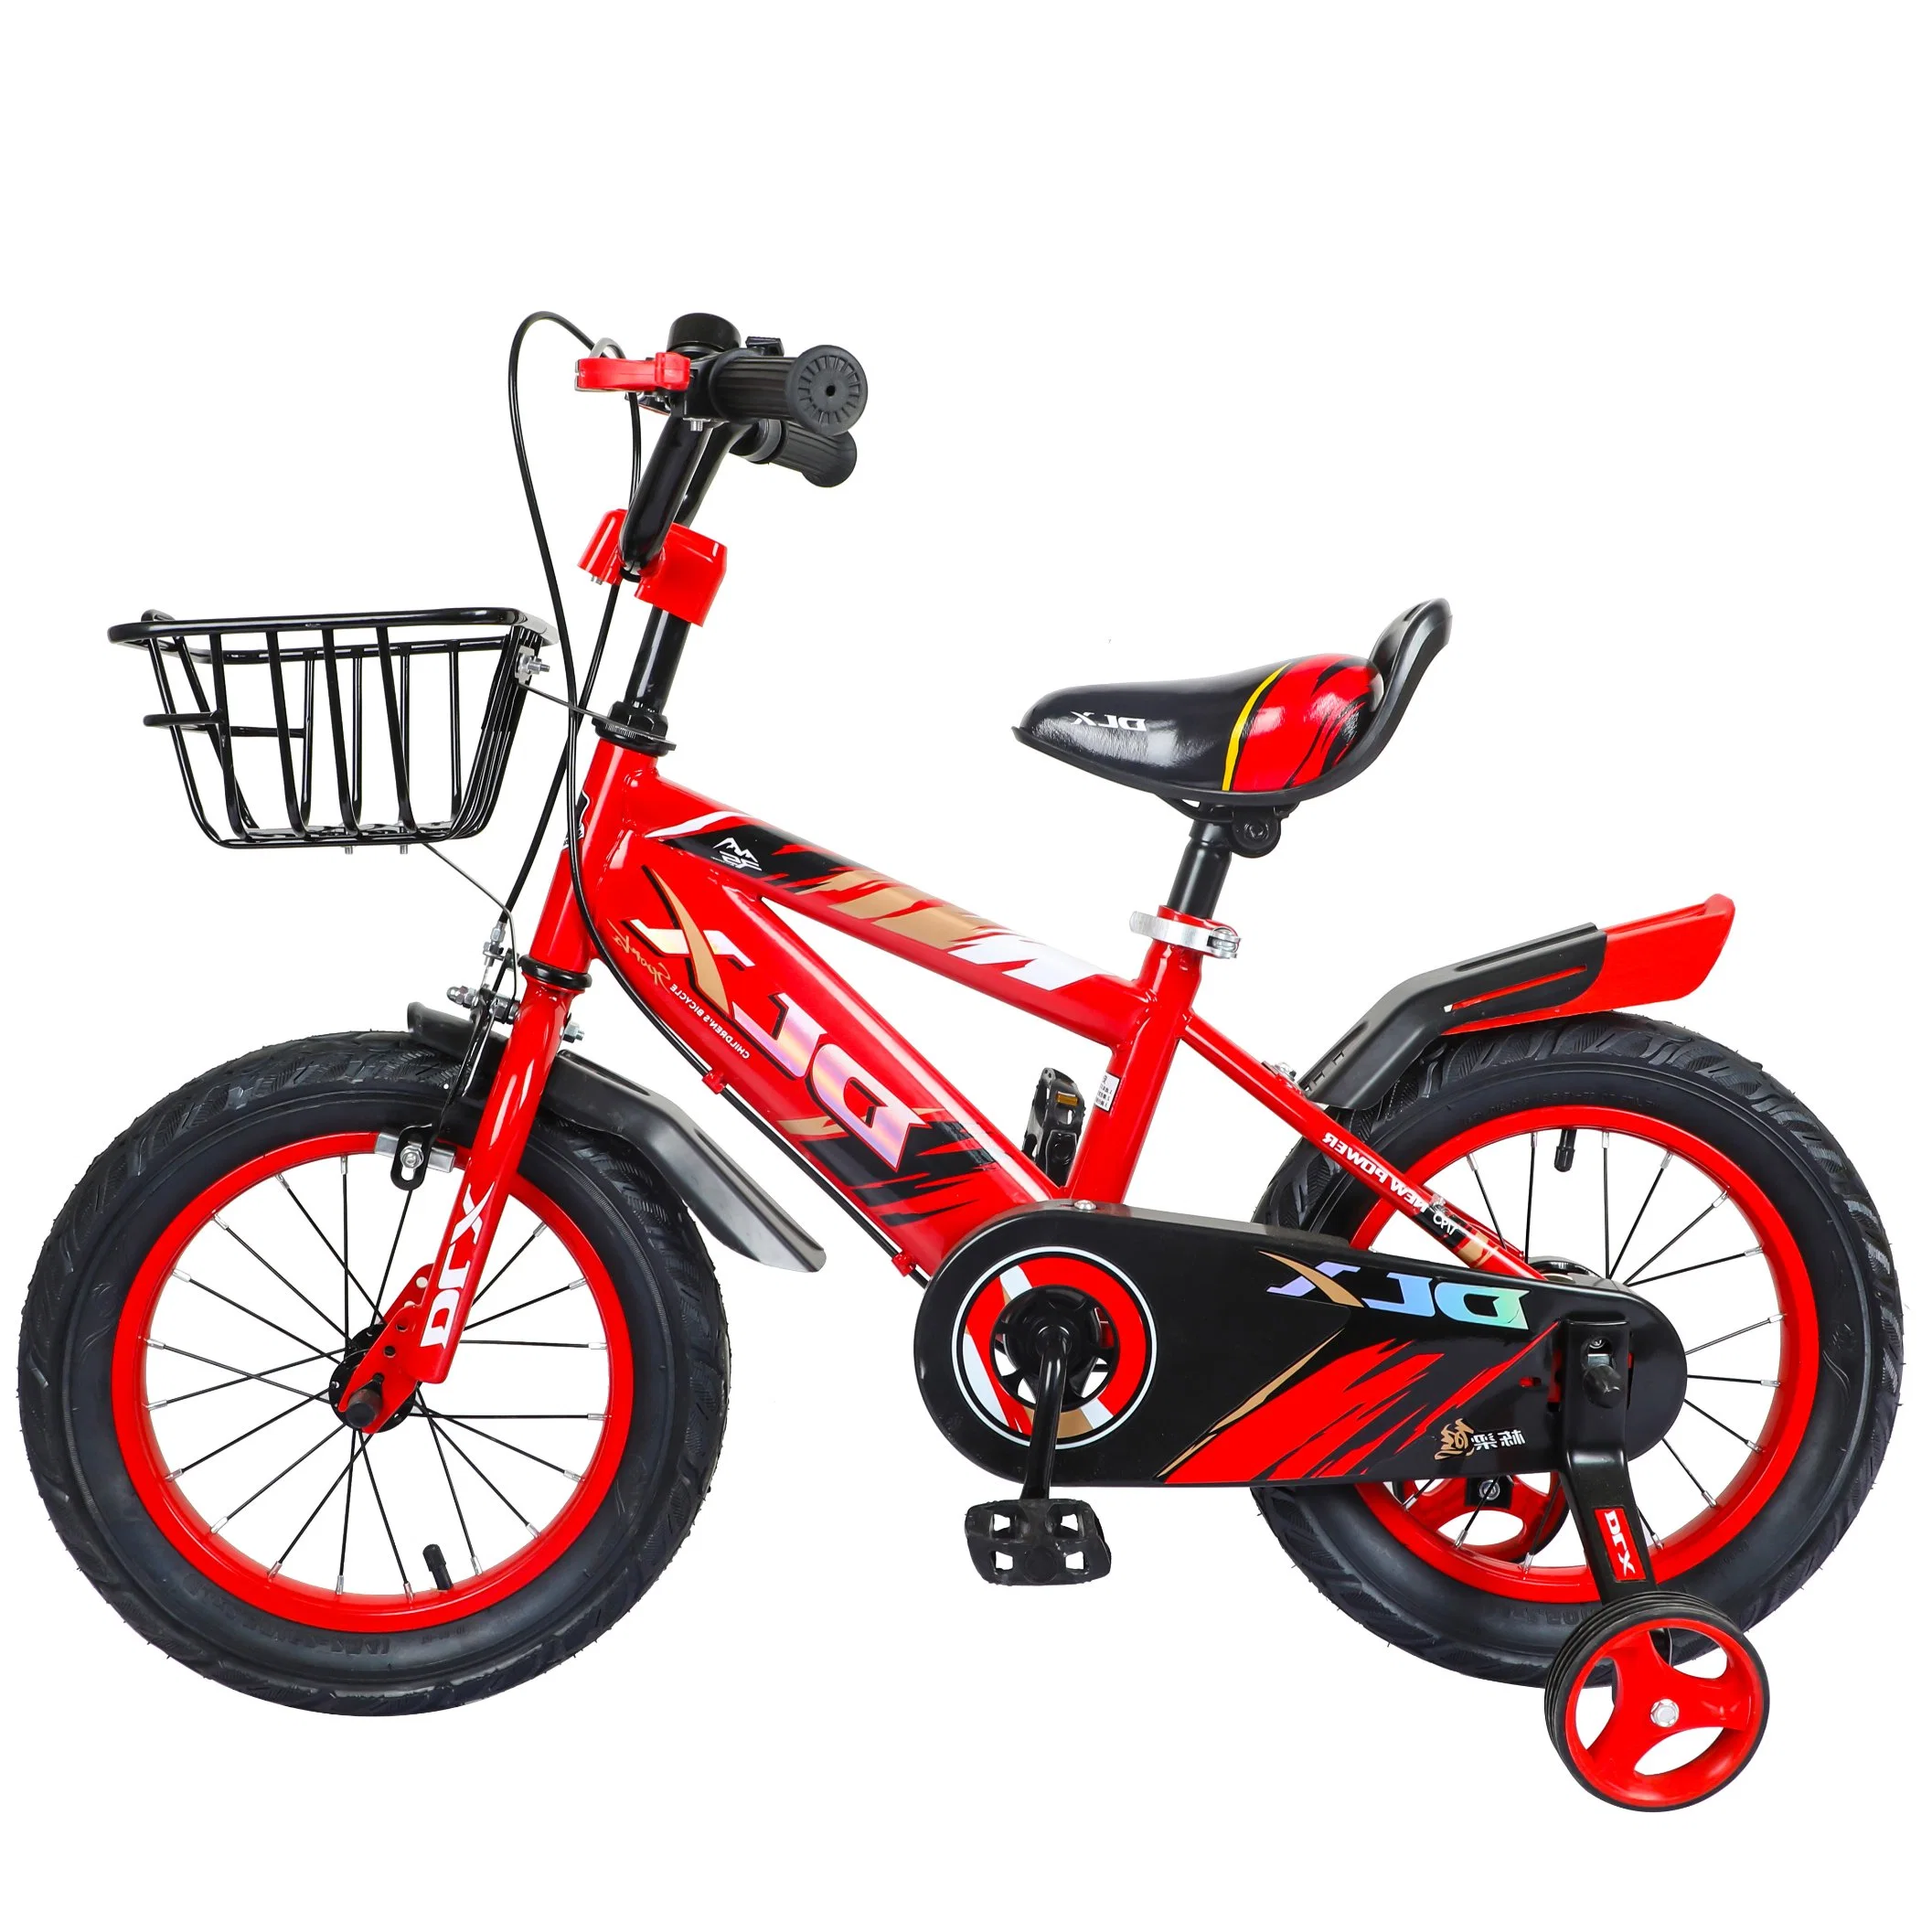 New Dirt Kids Bike Child Kids Bicycle 16 Inch Steel Children Bicycle for 5~12 Year Old Kids